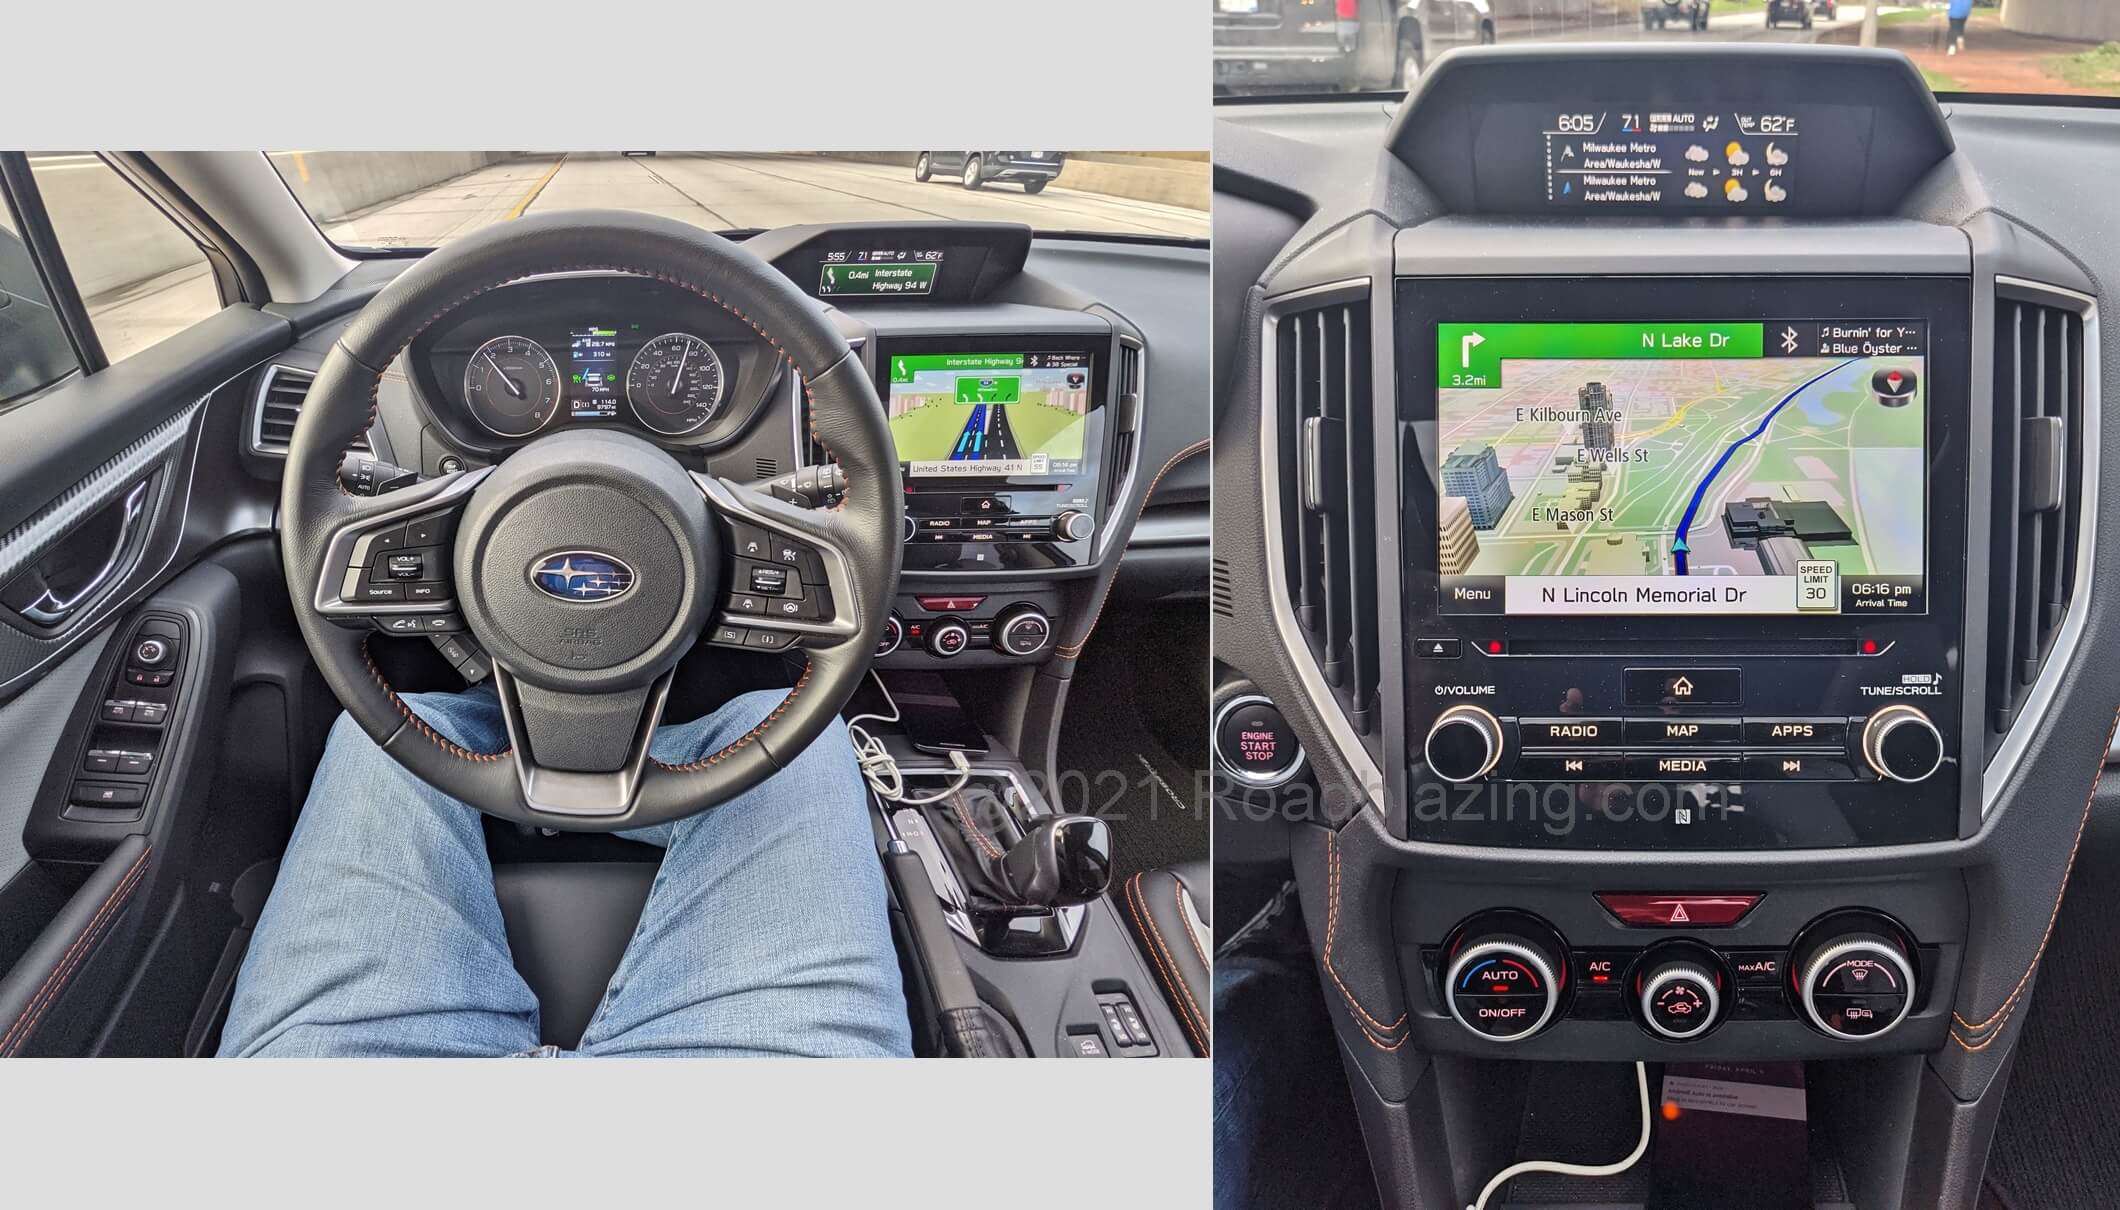 2021 Subaru Crosstrek Limited 2.5L: available TomTom voice command + guidance GPS navigation features high res 3-D maps on 8.0" touch LCD screen